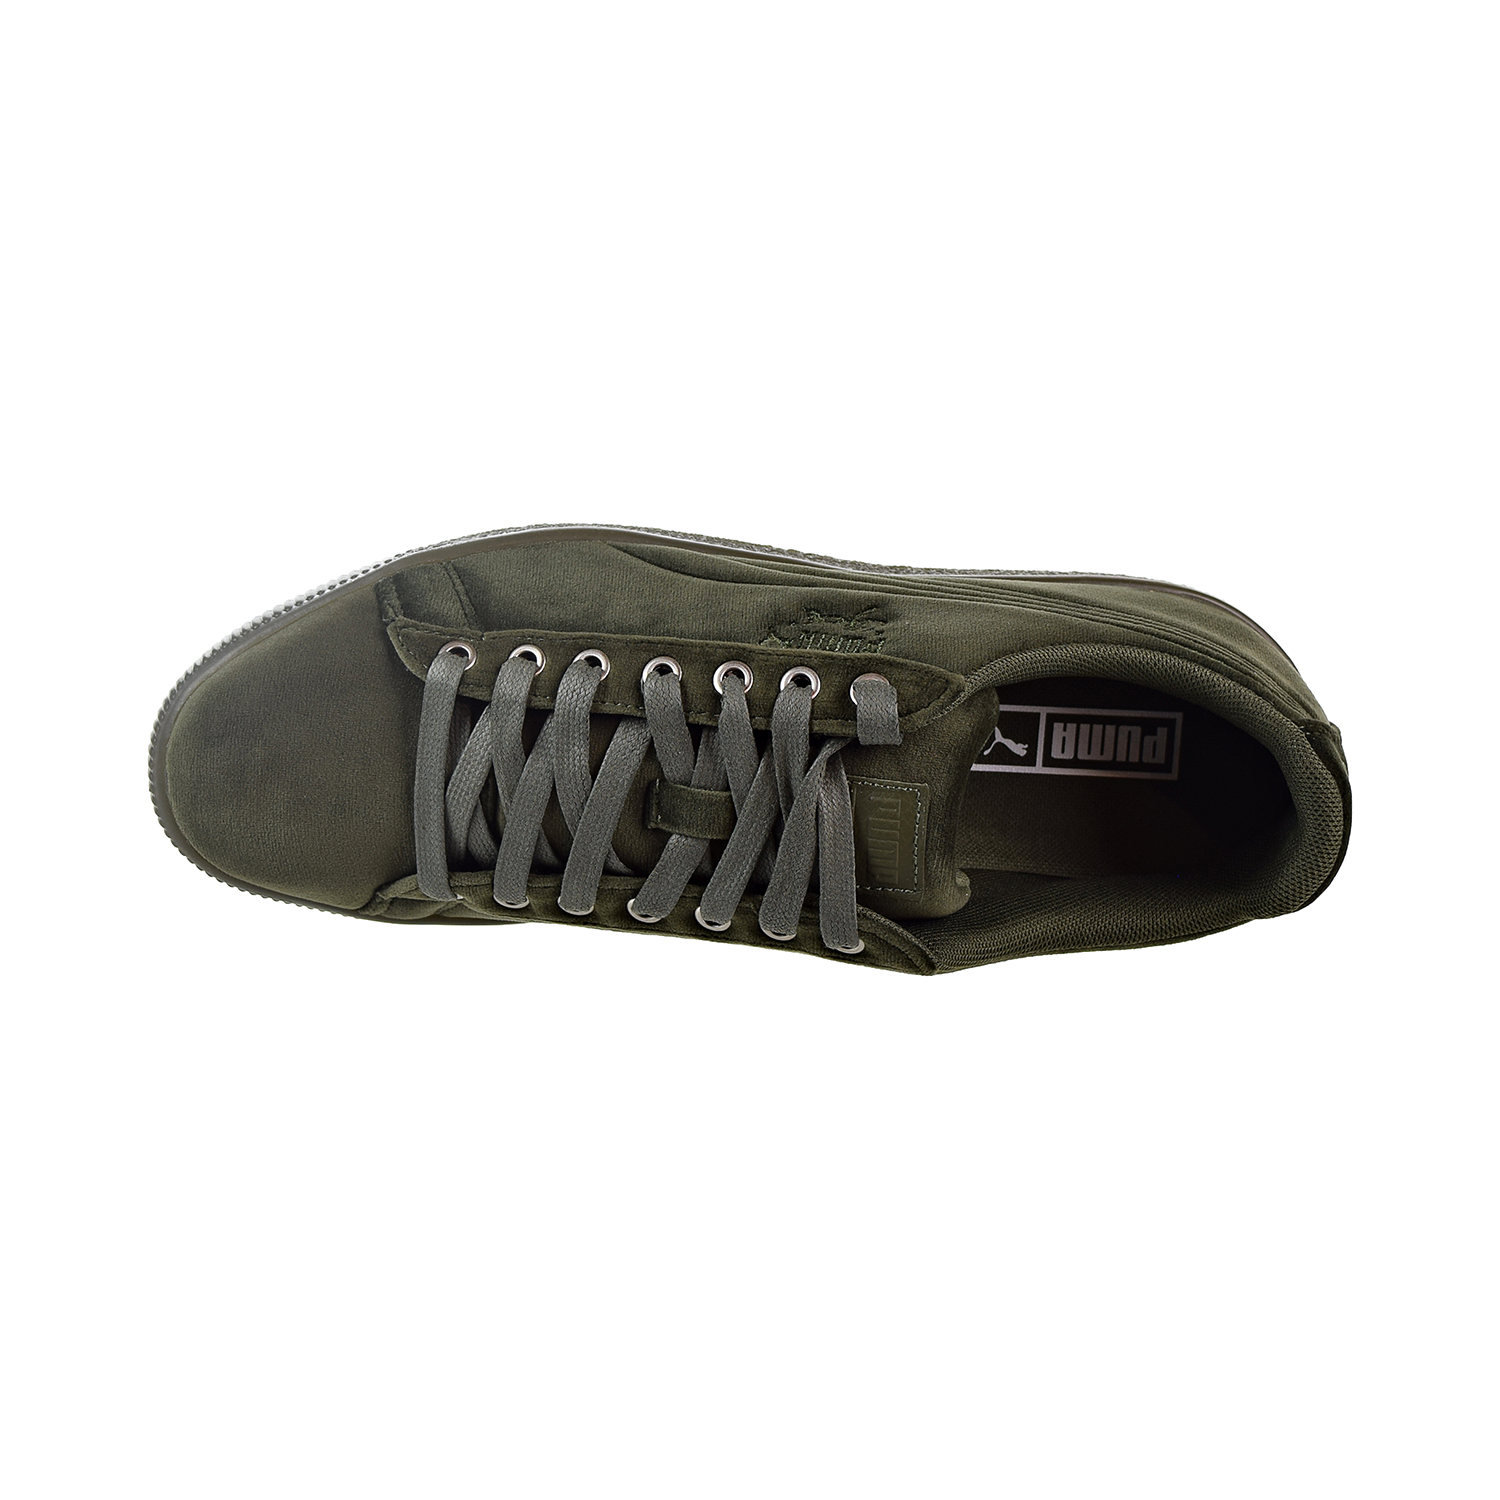 Puma clyde Velour Ice Men's Shoes Olive Green 366549-03 - image 5 of 6